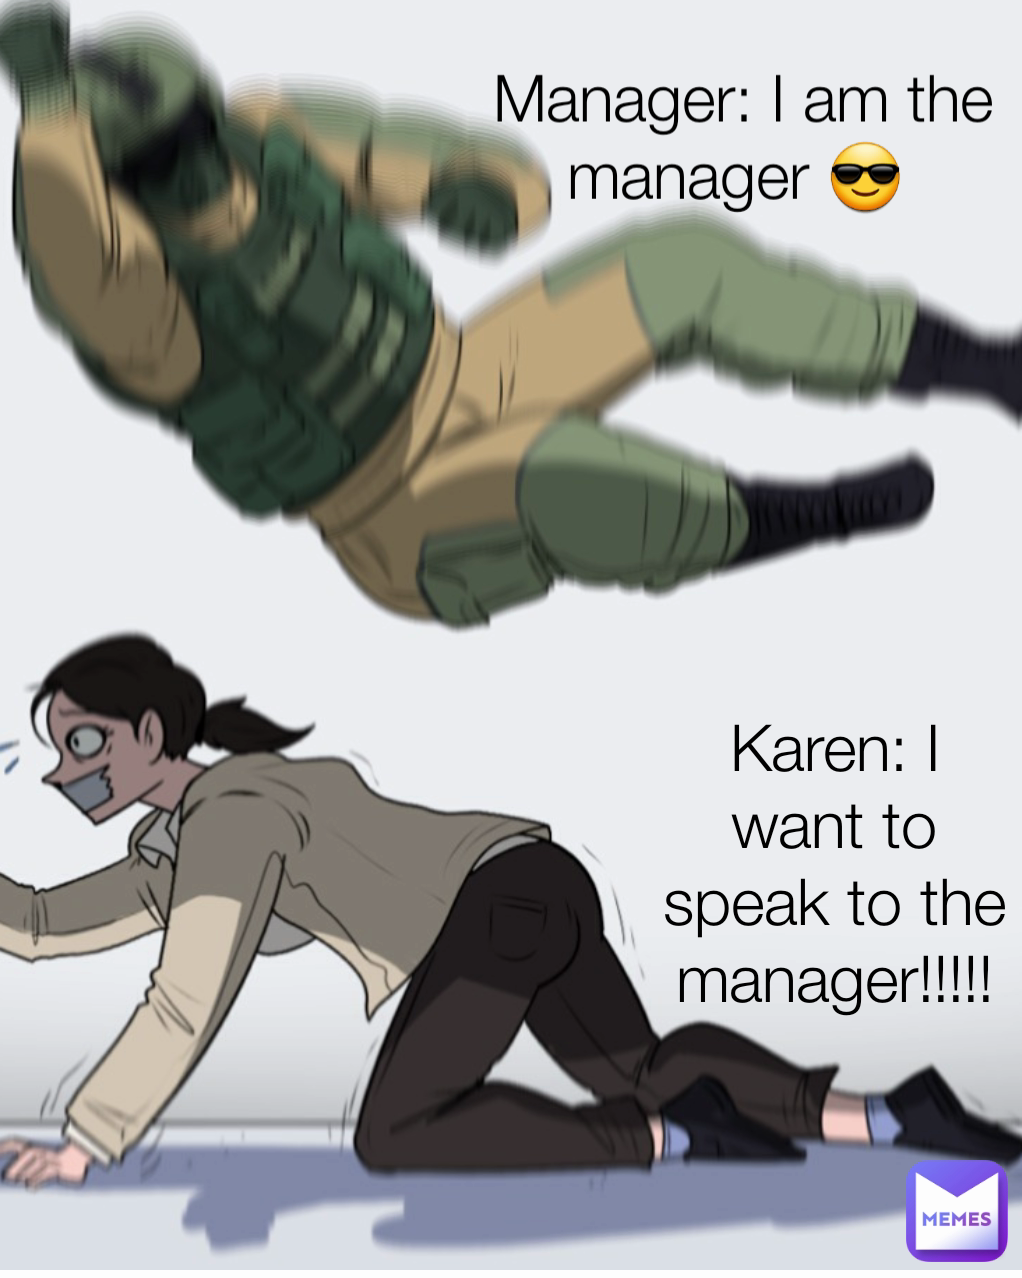 Karen: I want to speak to the manager!!!!! Manager: I am the manager 😎 